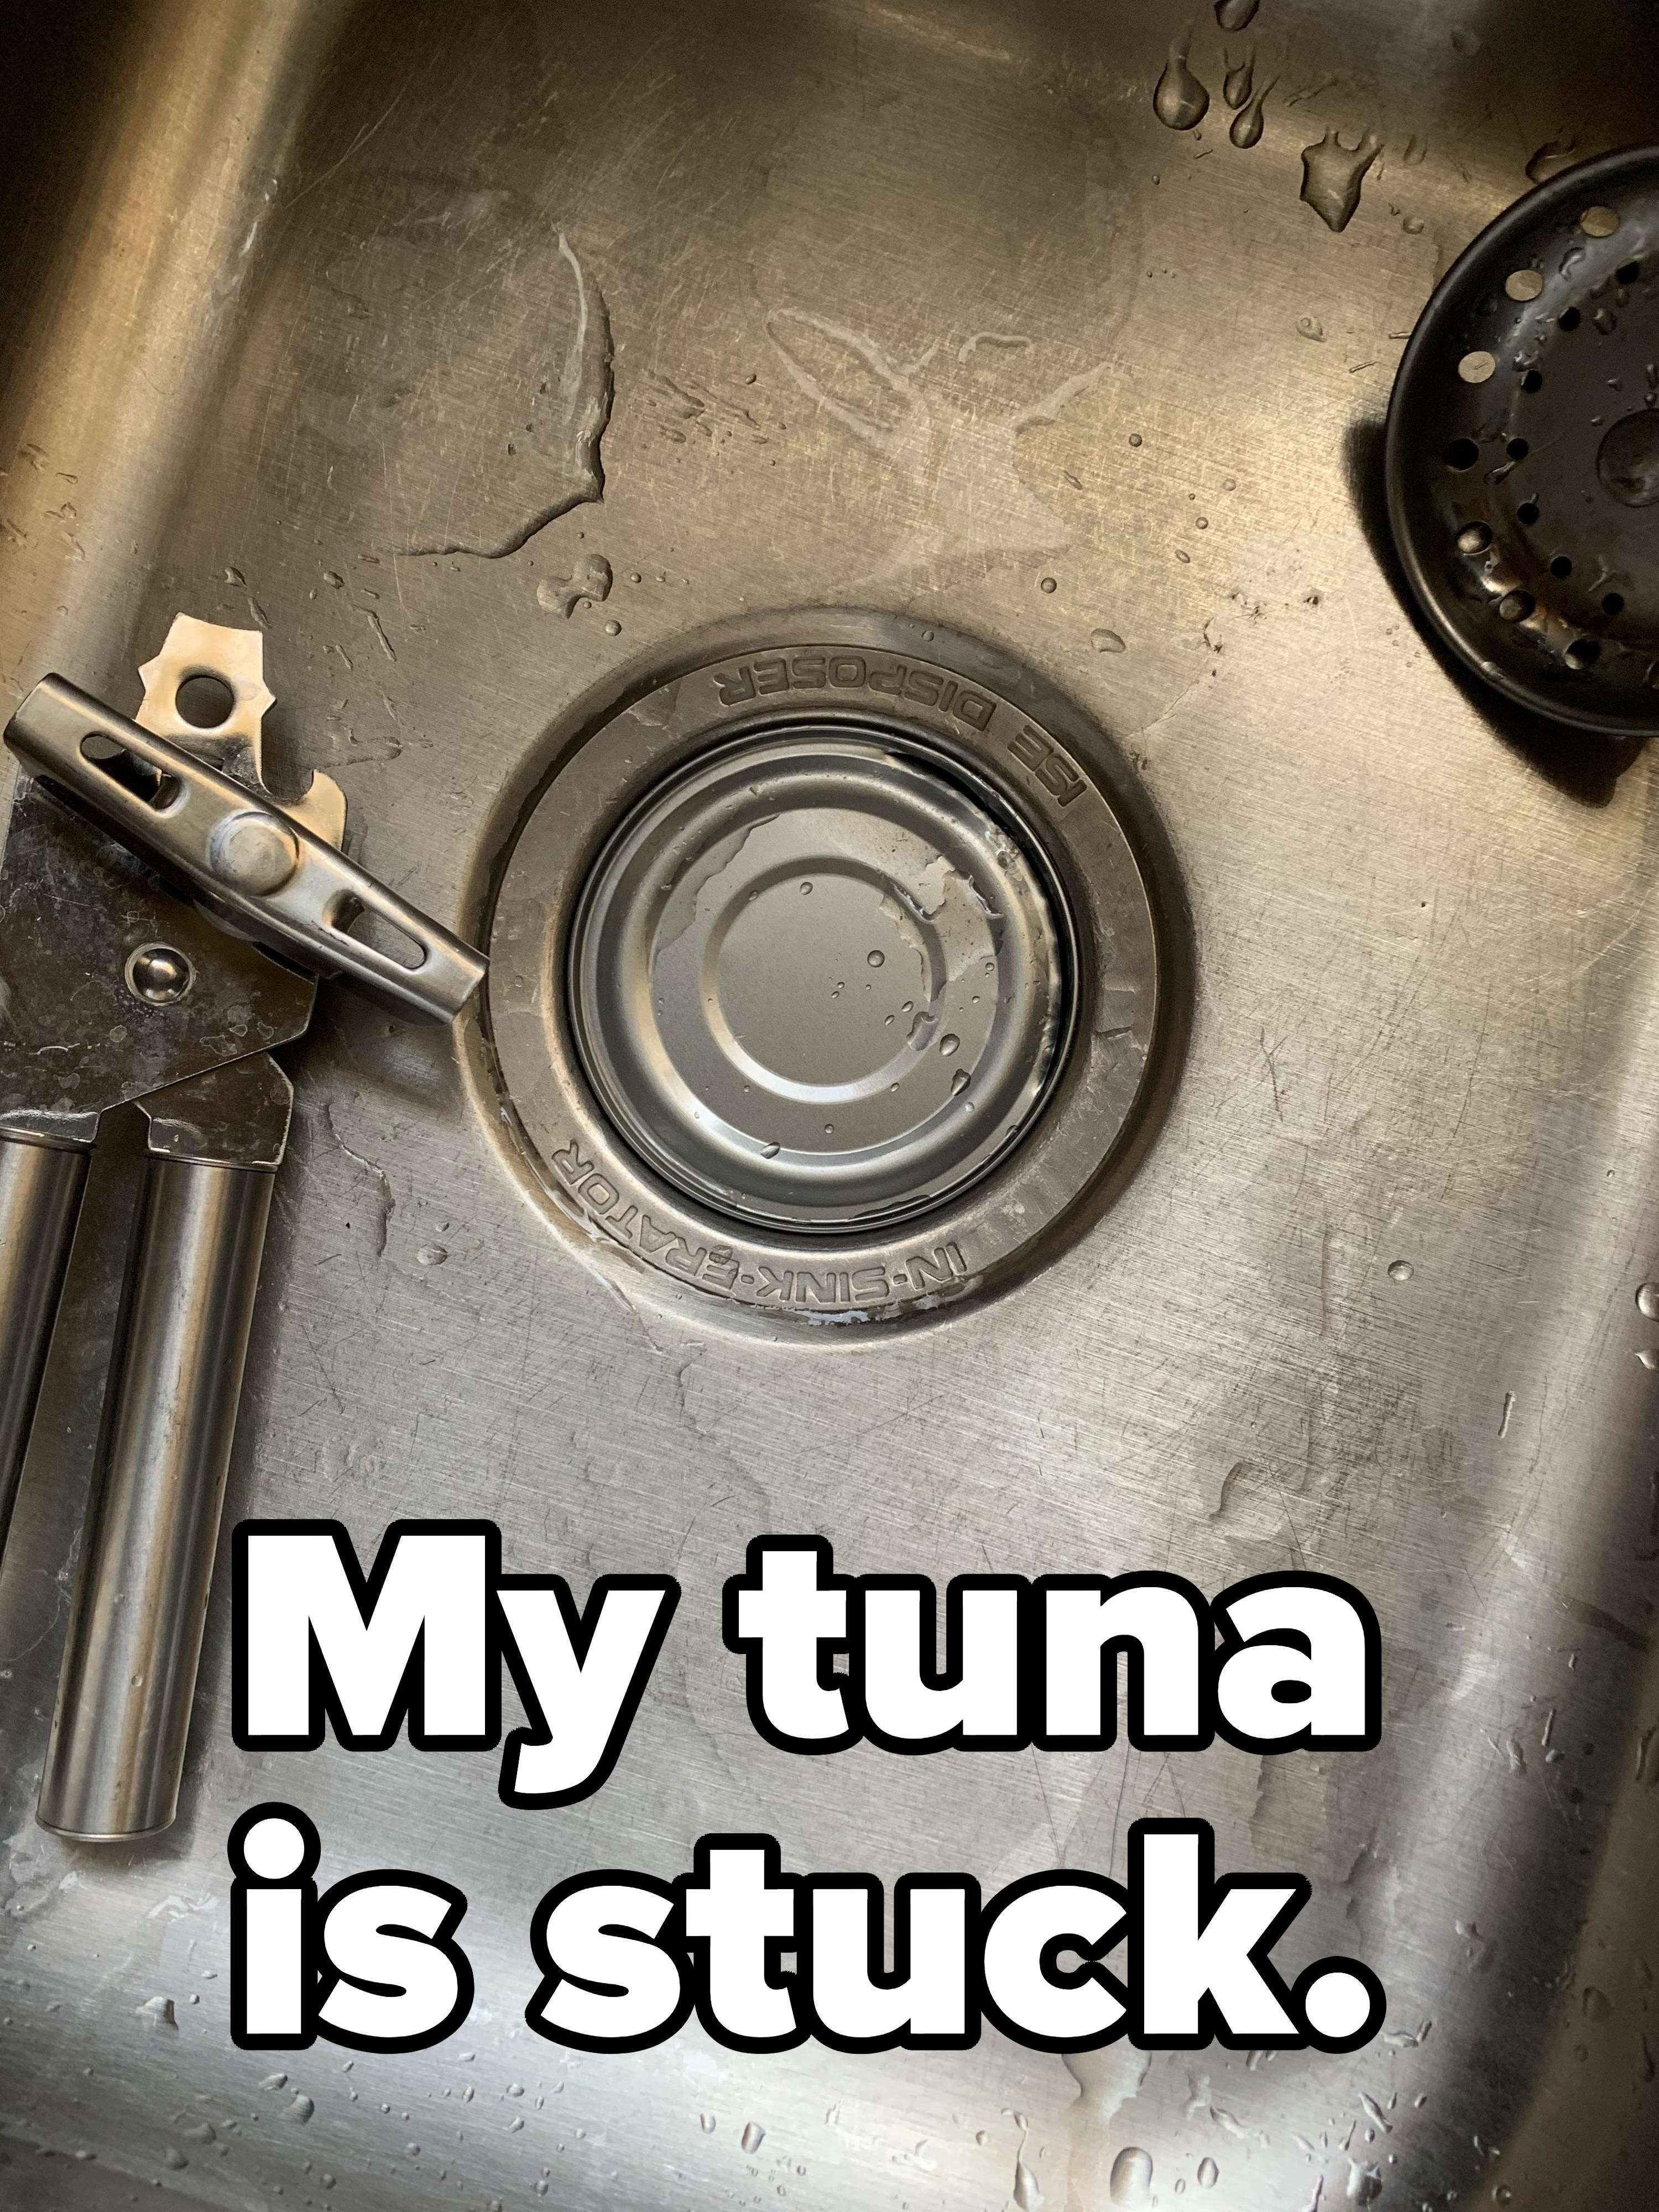 The top of a tuna can perfectly stuck in a sink drain